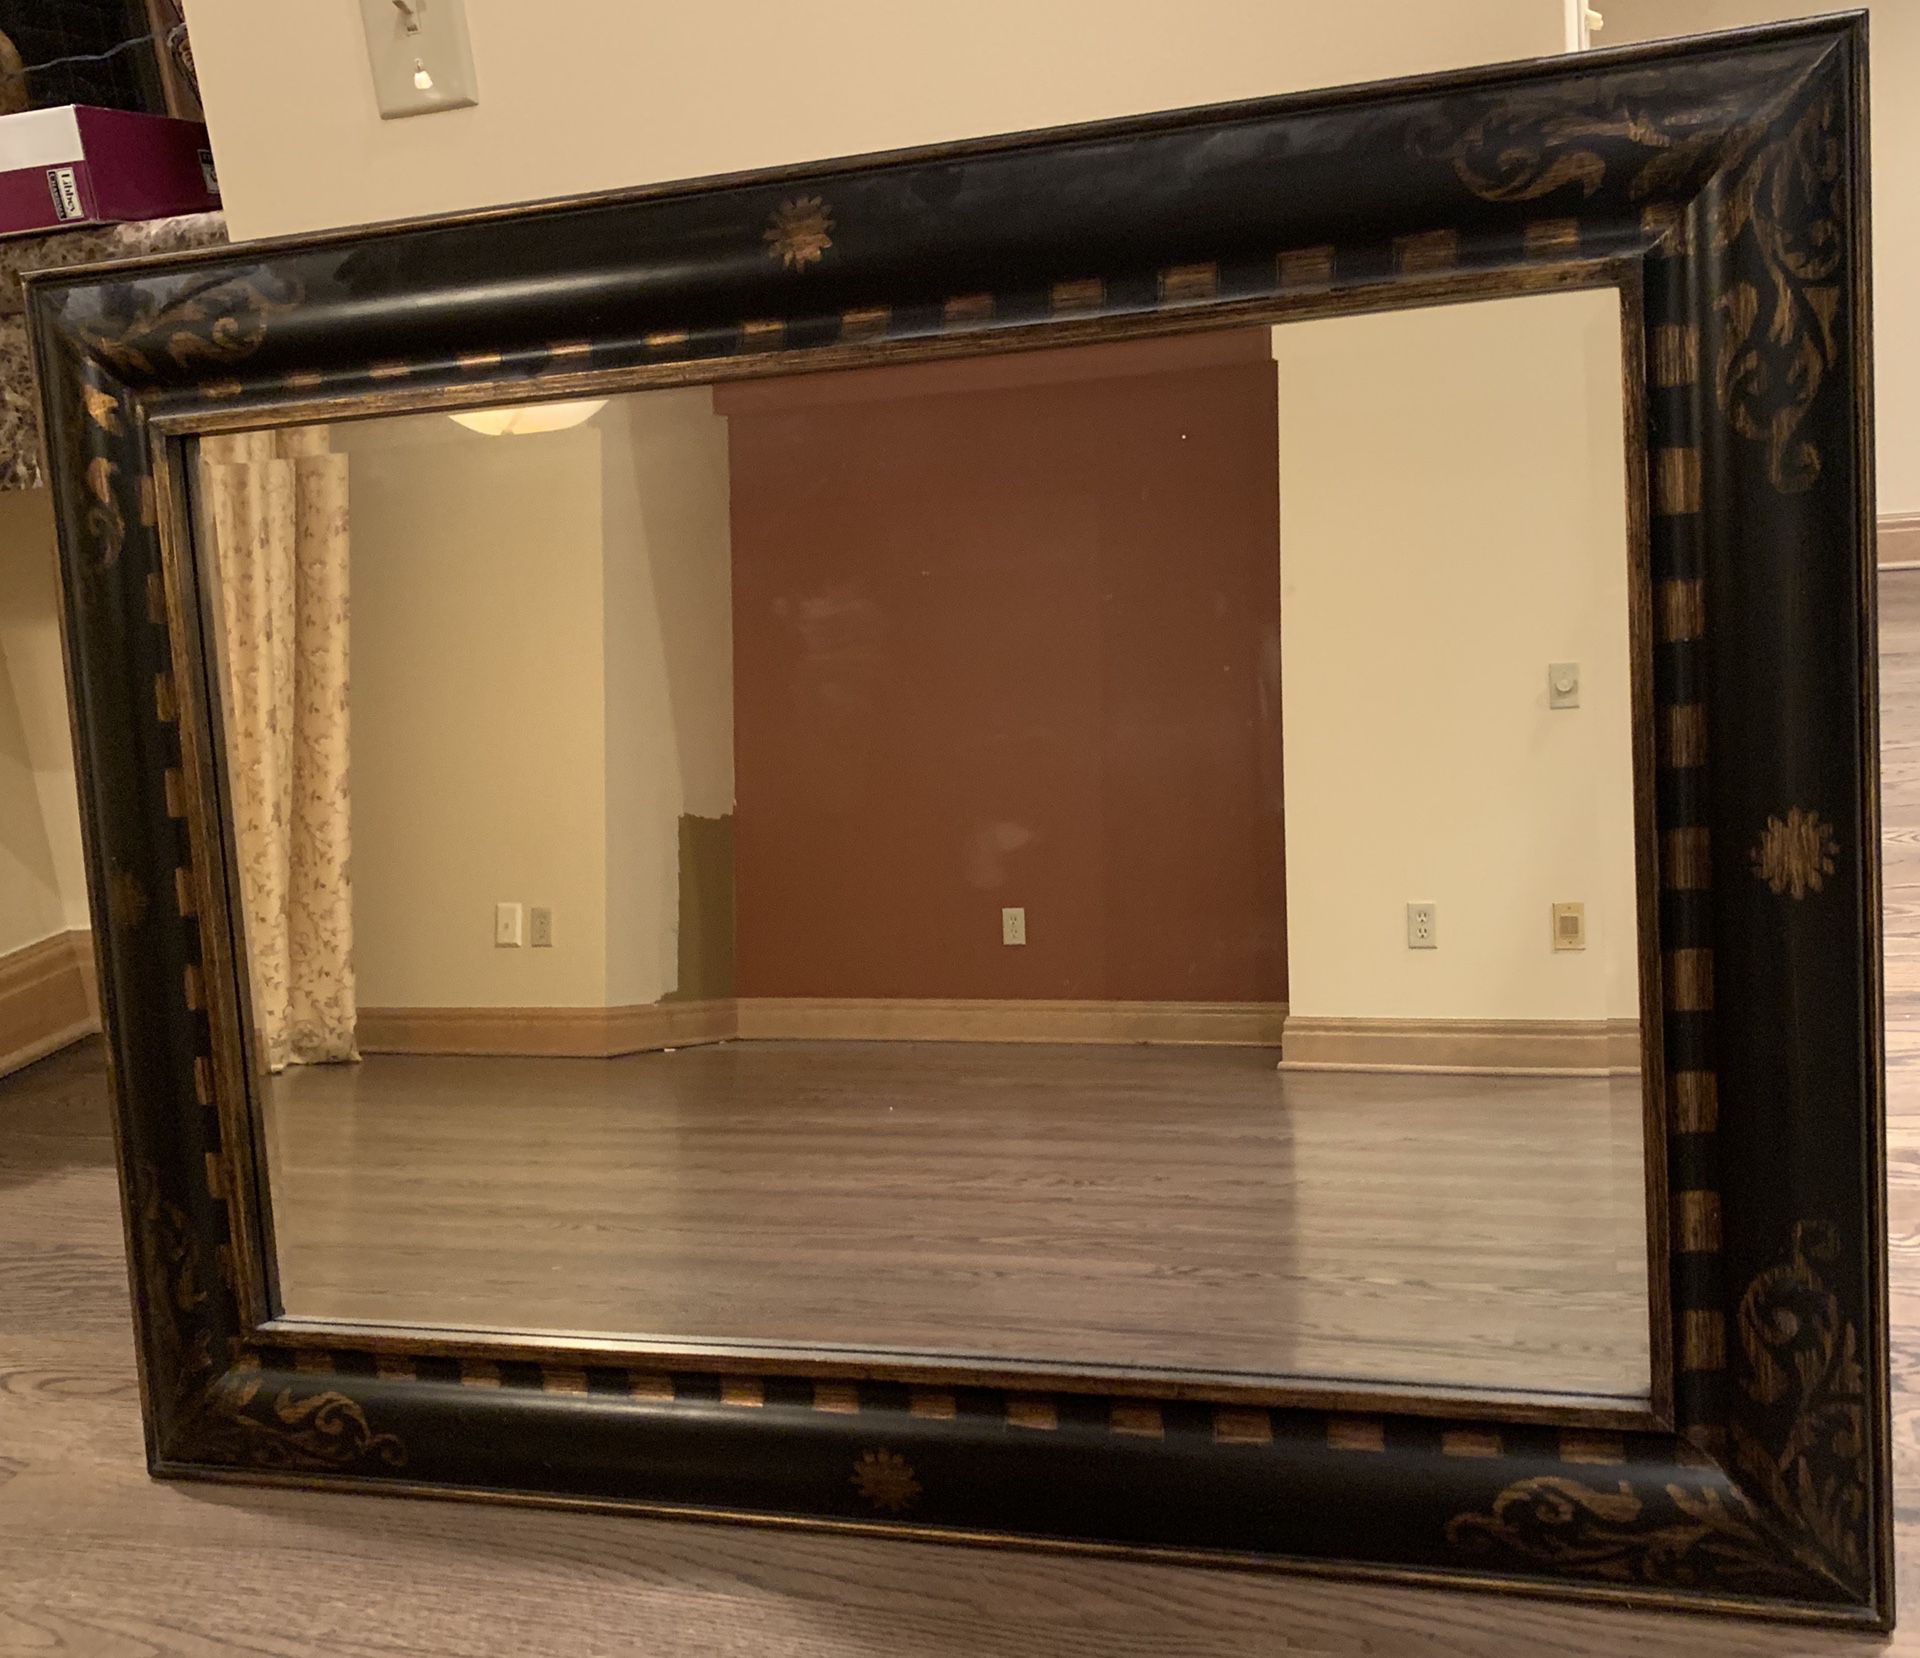 Beautiful 45 x 33 in large hanging mirror with gold and brown frame with accents